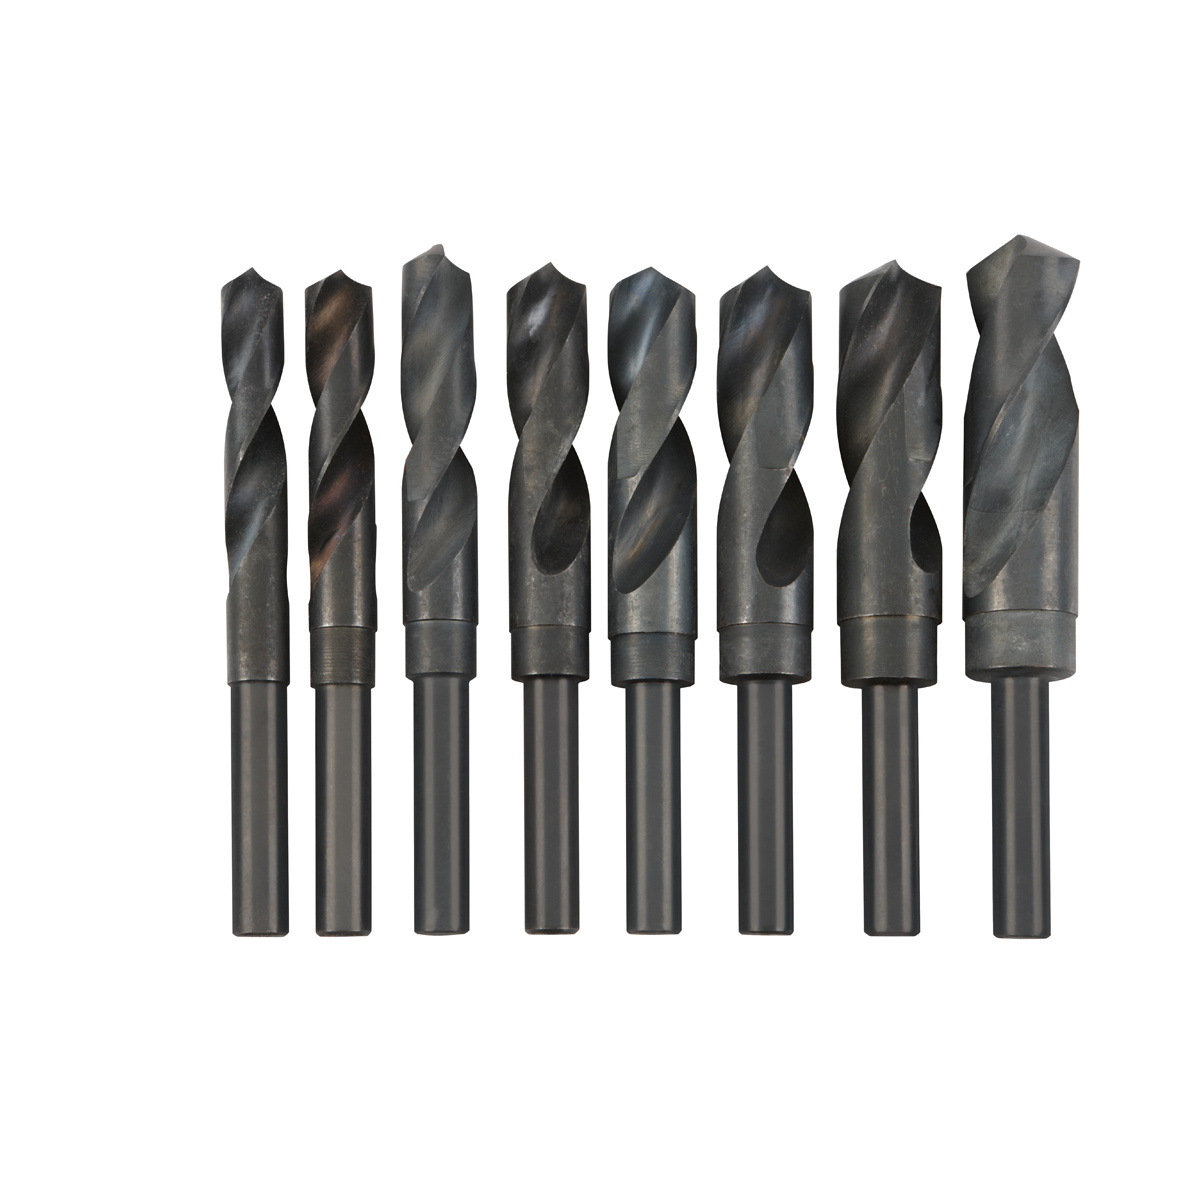 WARRIOR Silver And Deming Drill Bit Set 8 Pc. - Item 61802 / 00527